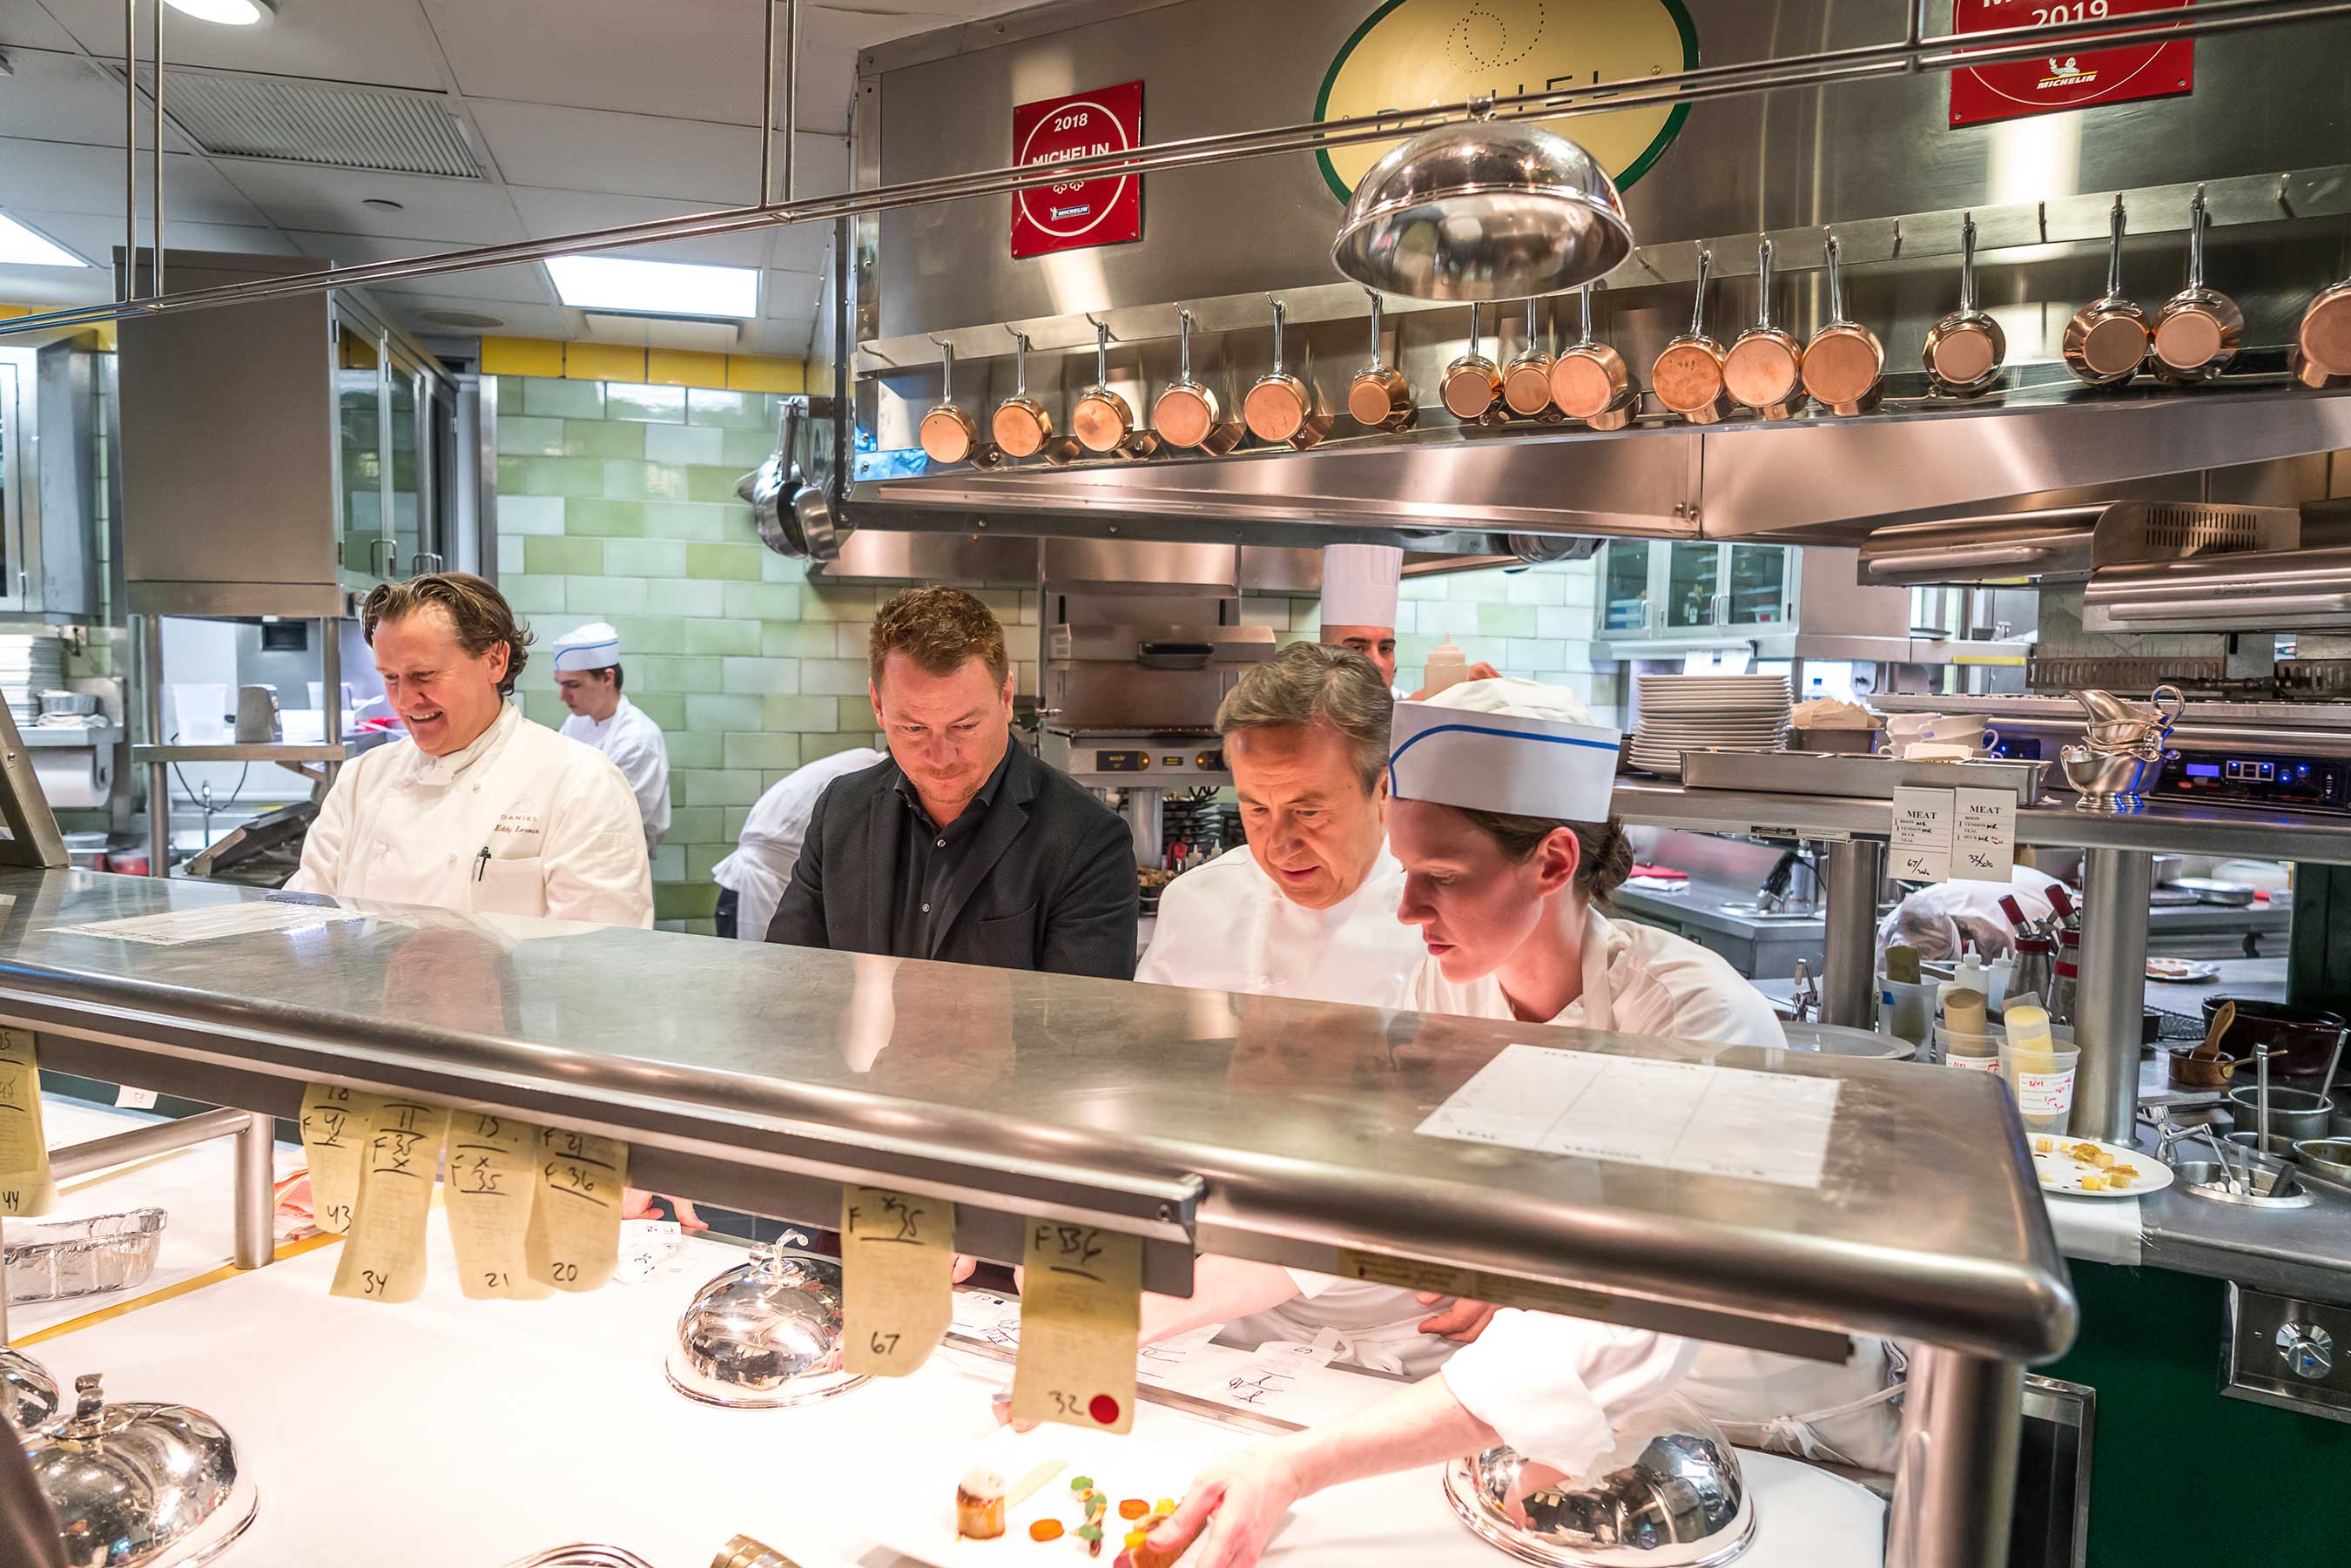 Cornelius Gallagher, Celebrity Cruises, AVP Food and Beverage Operations, with Chef Daniel Boulud, cooking together at Daniel